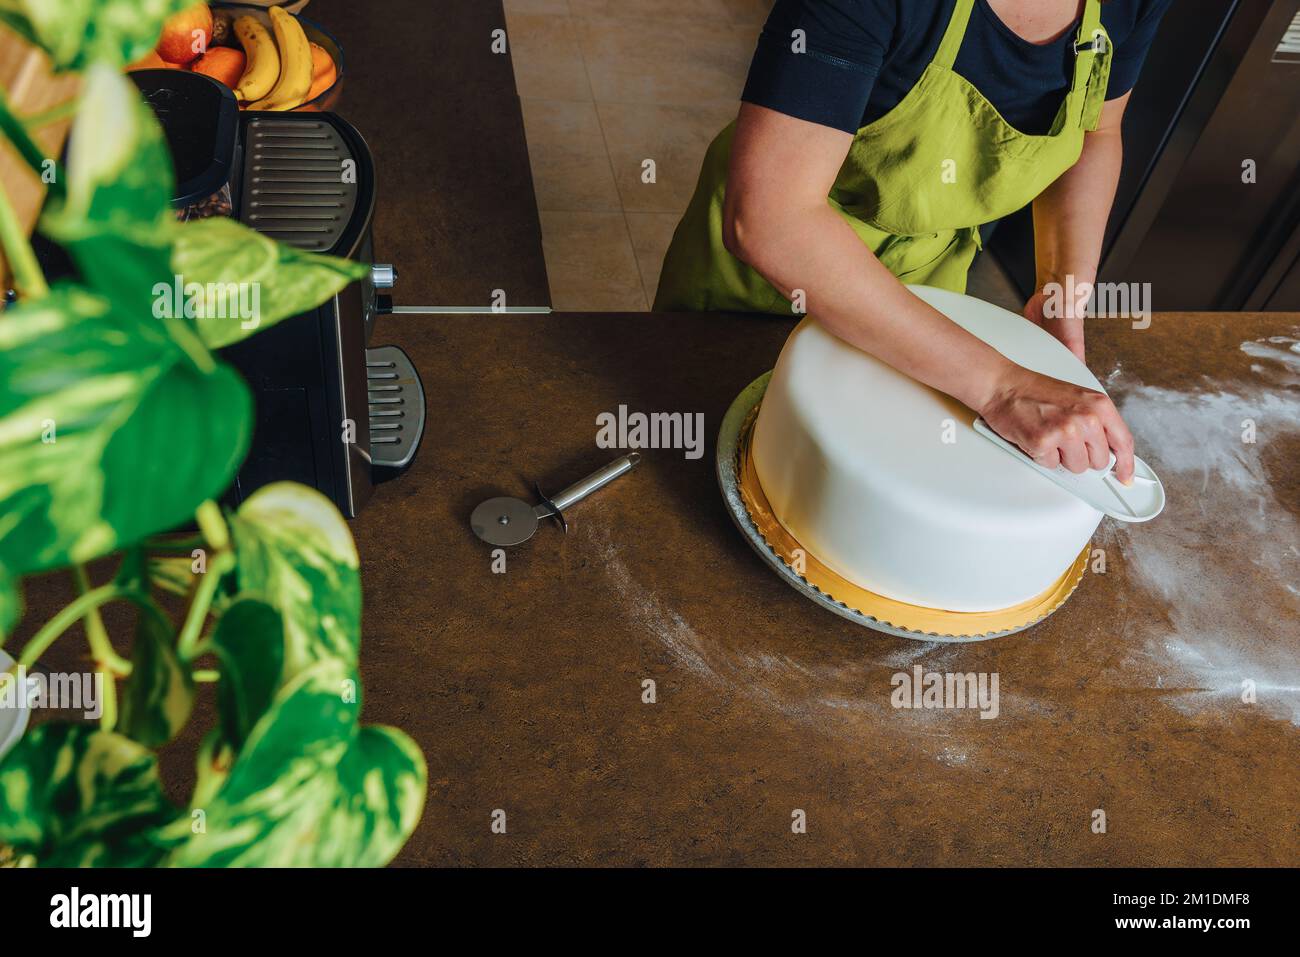 Unrecognisable woman in bakery decorating wedding cake with white fondant. DIY, sequence, step by step, multiple image. Stock Photo